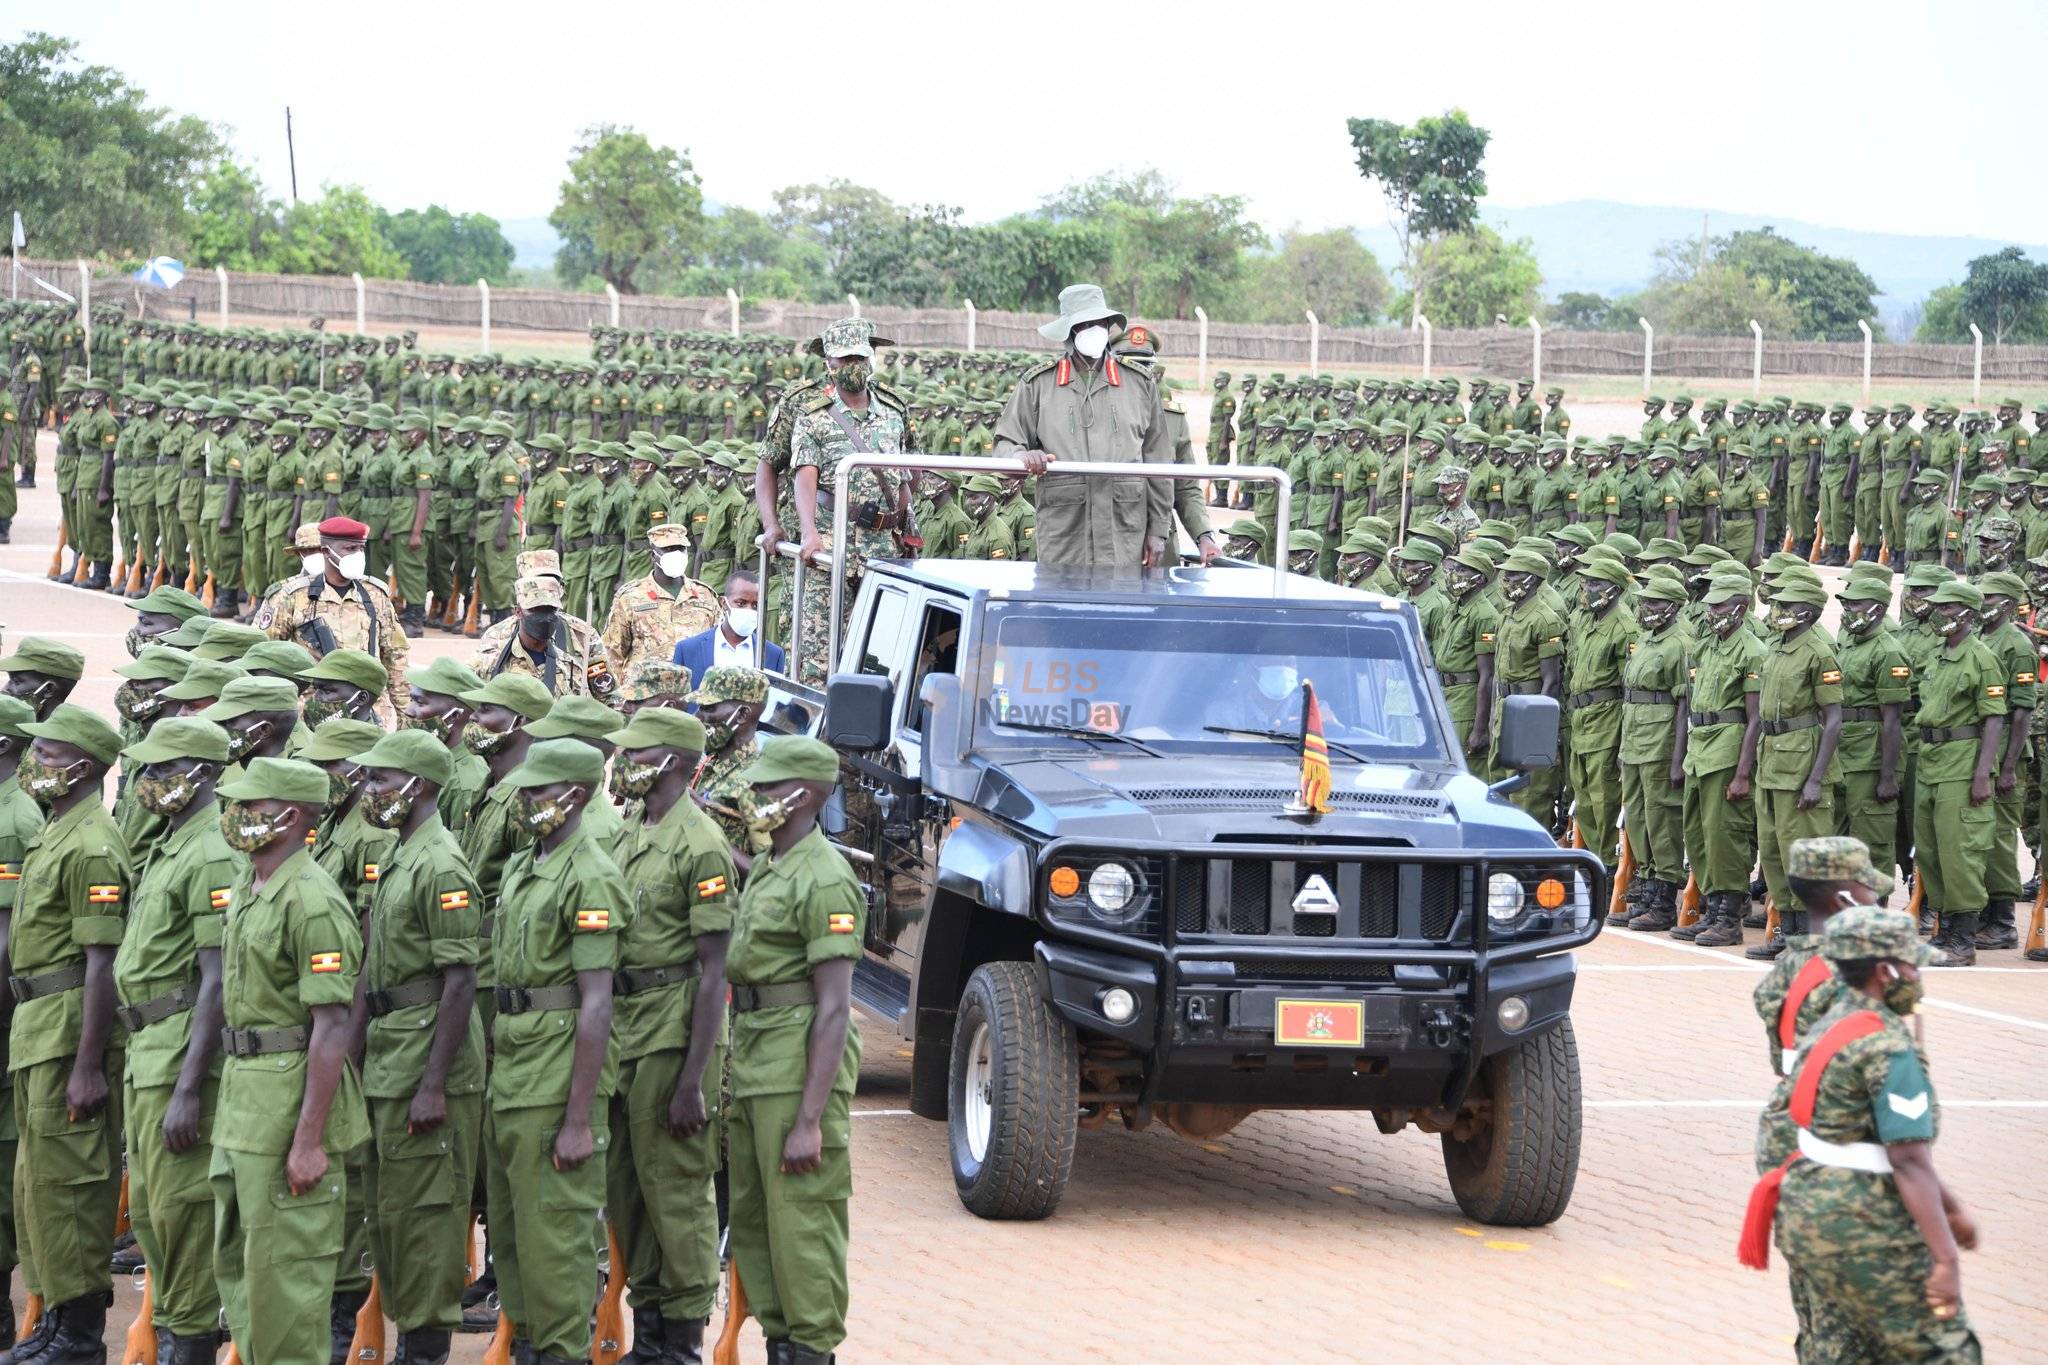 Museveni vows to defeat latest insecurity in Karamoja